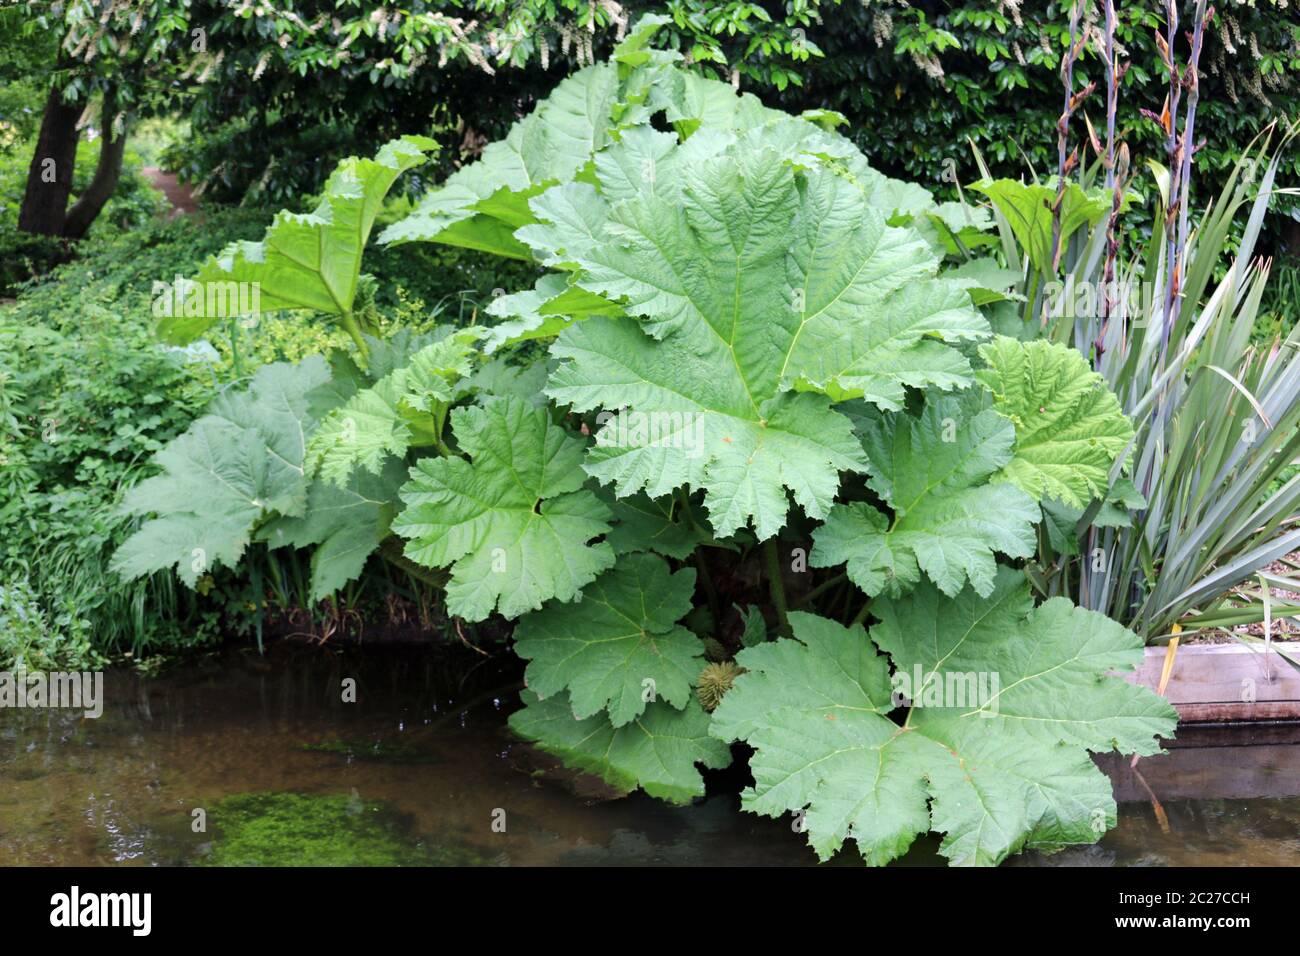 Large leaves of a Gunnera plant on a river bank with a background of blurred shrubs and trees. Stock Photo